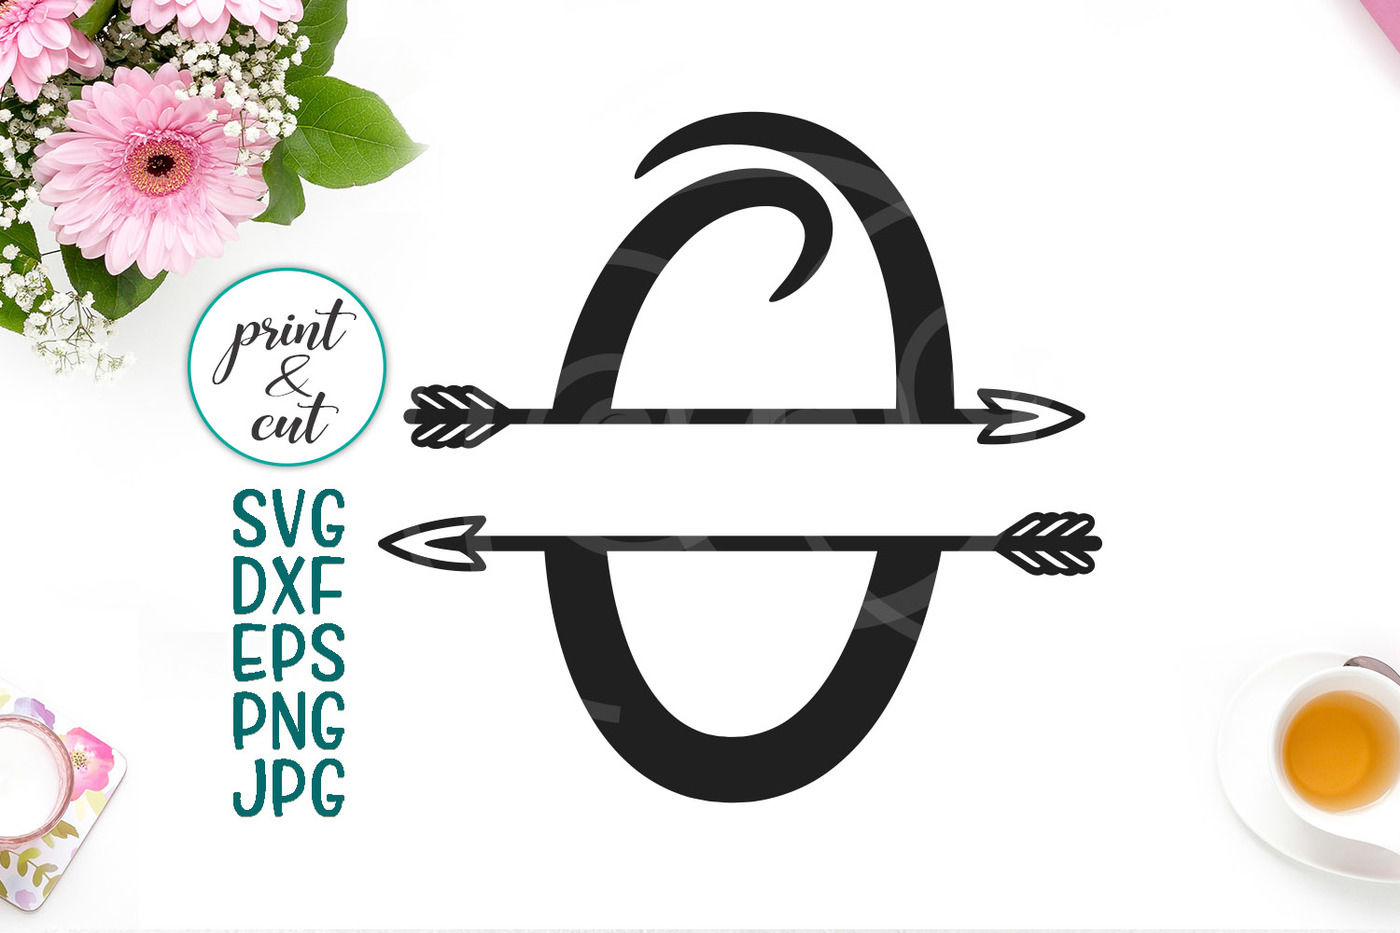 Arrow Round Monogram SVG - SVG EPS PNG DXF Cut Files for Cricut and  Silhouette Cameo by SavanasDesign